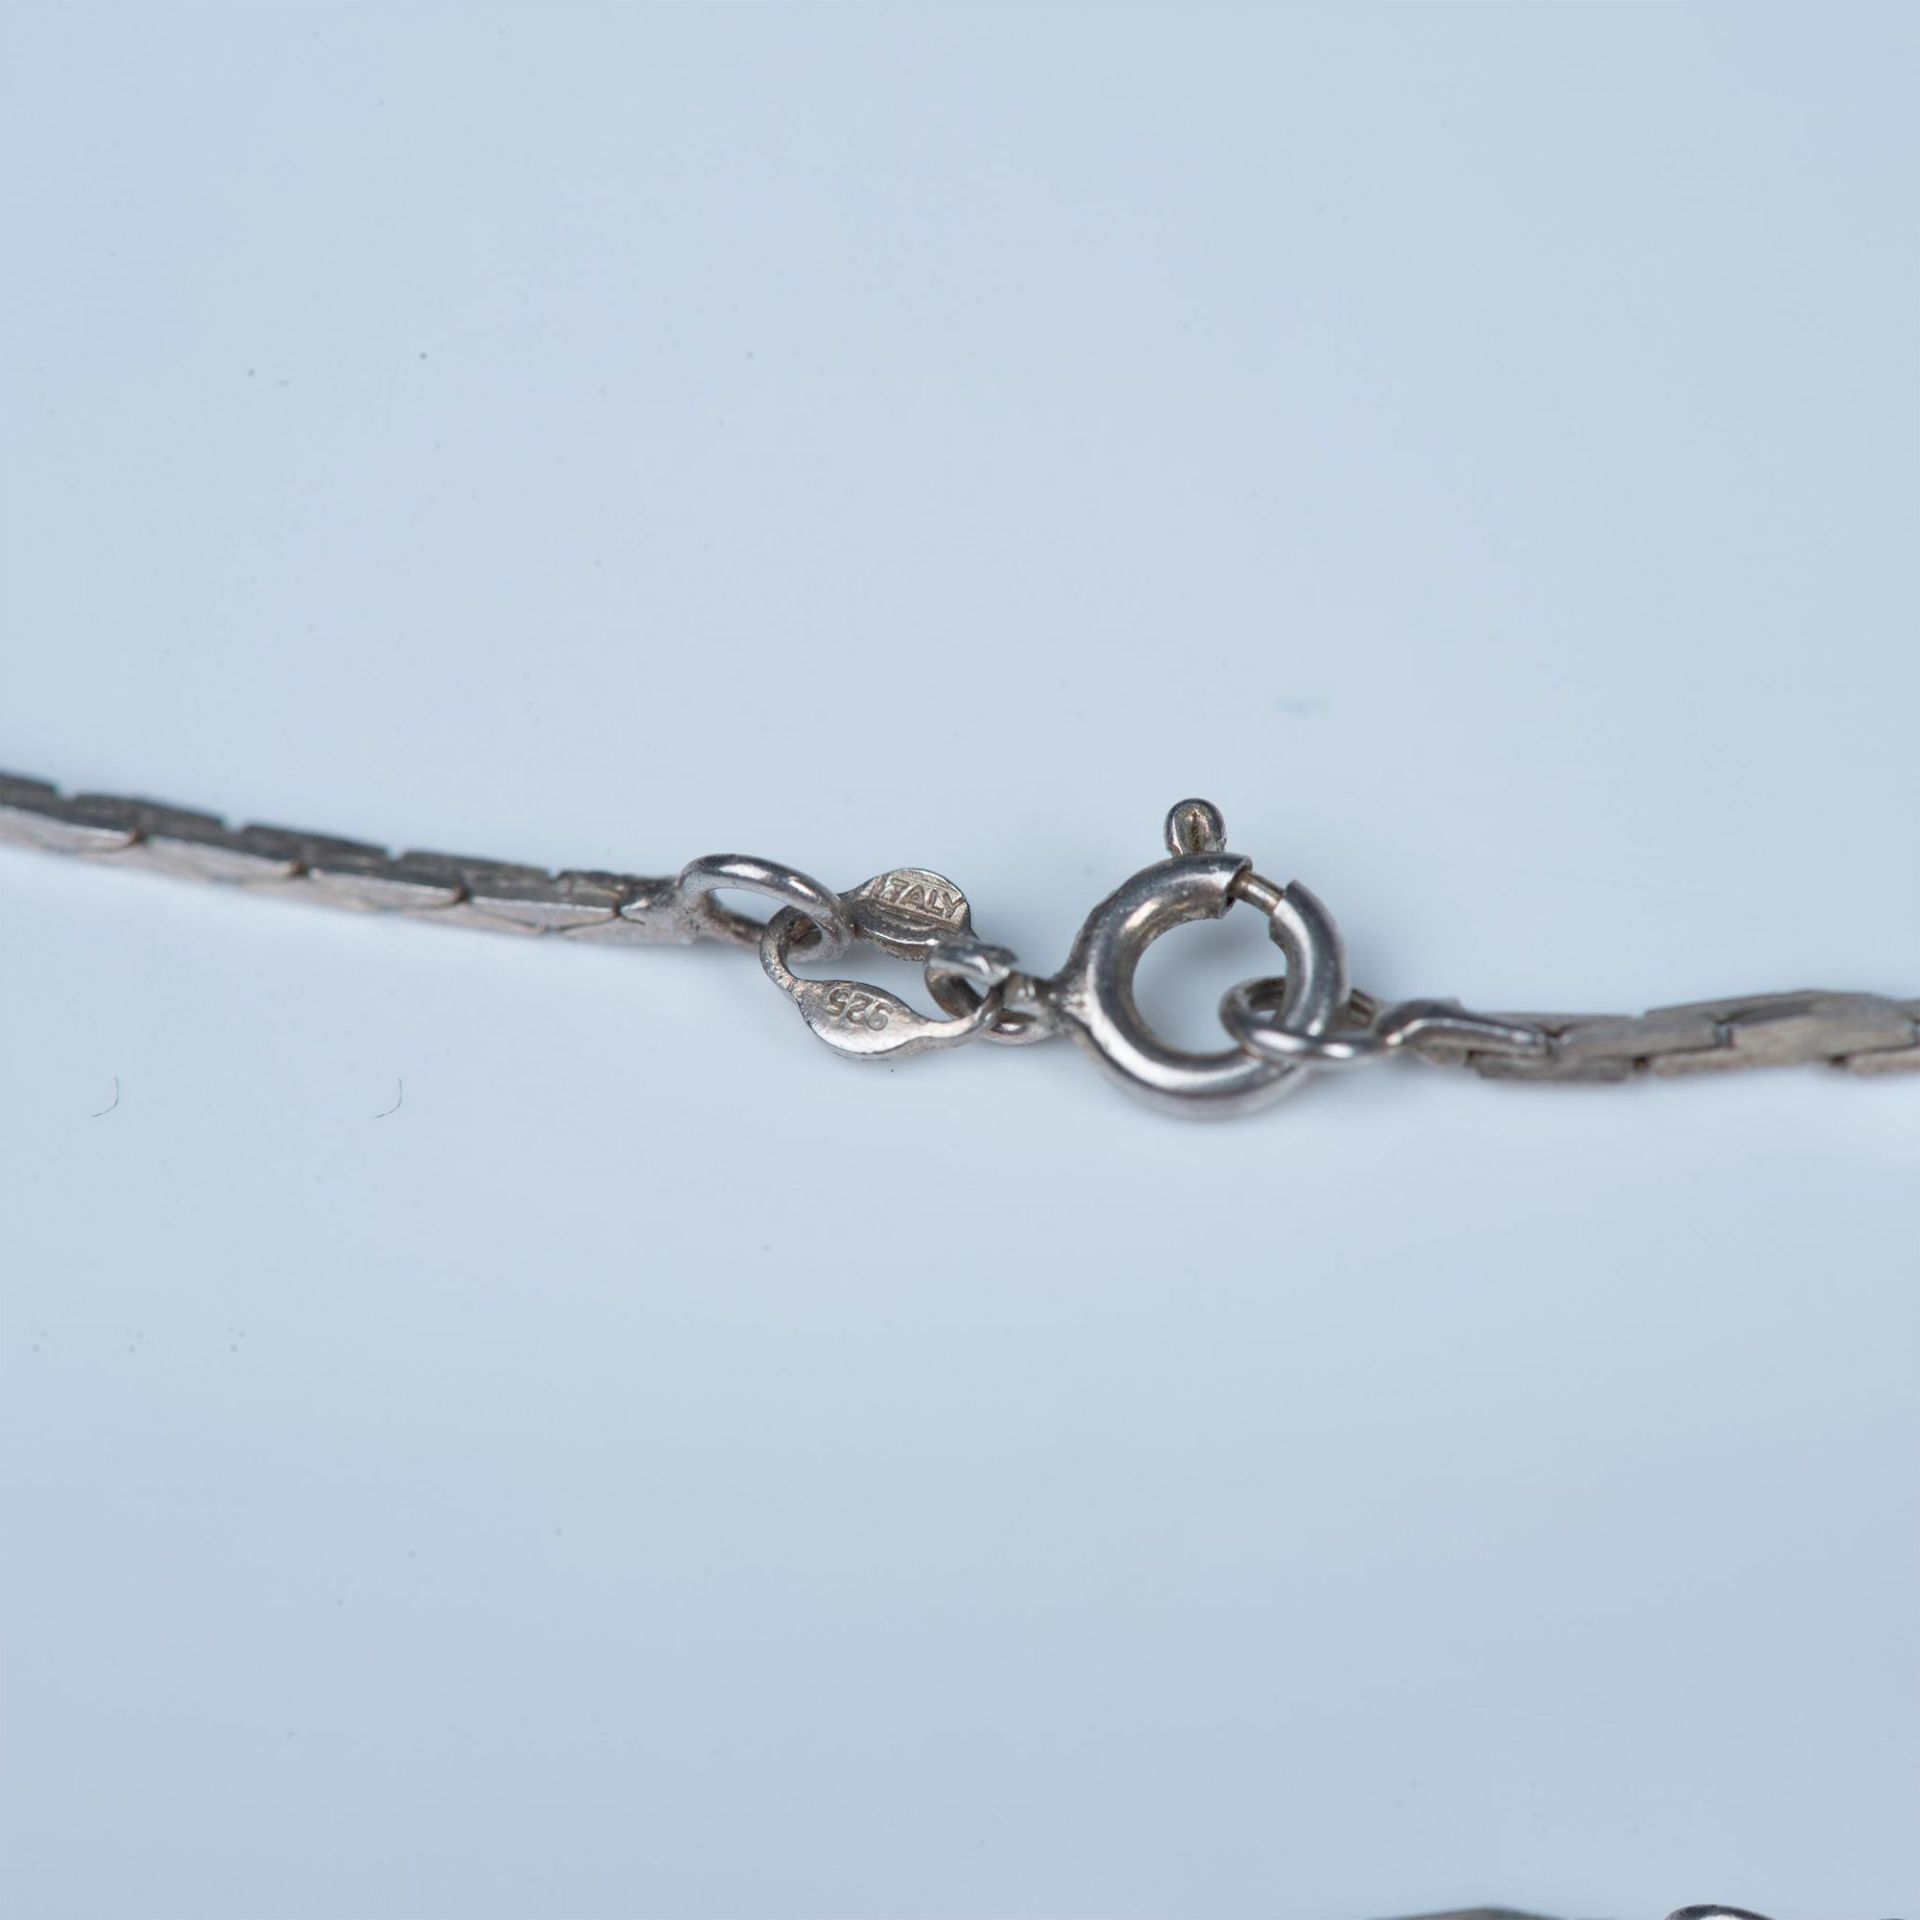 2pc Sterling Silver Chains - Image 3 of 7